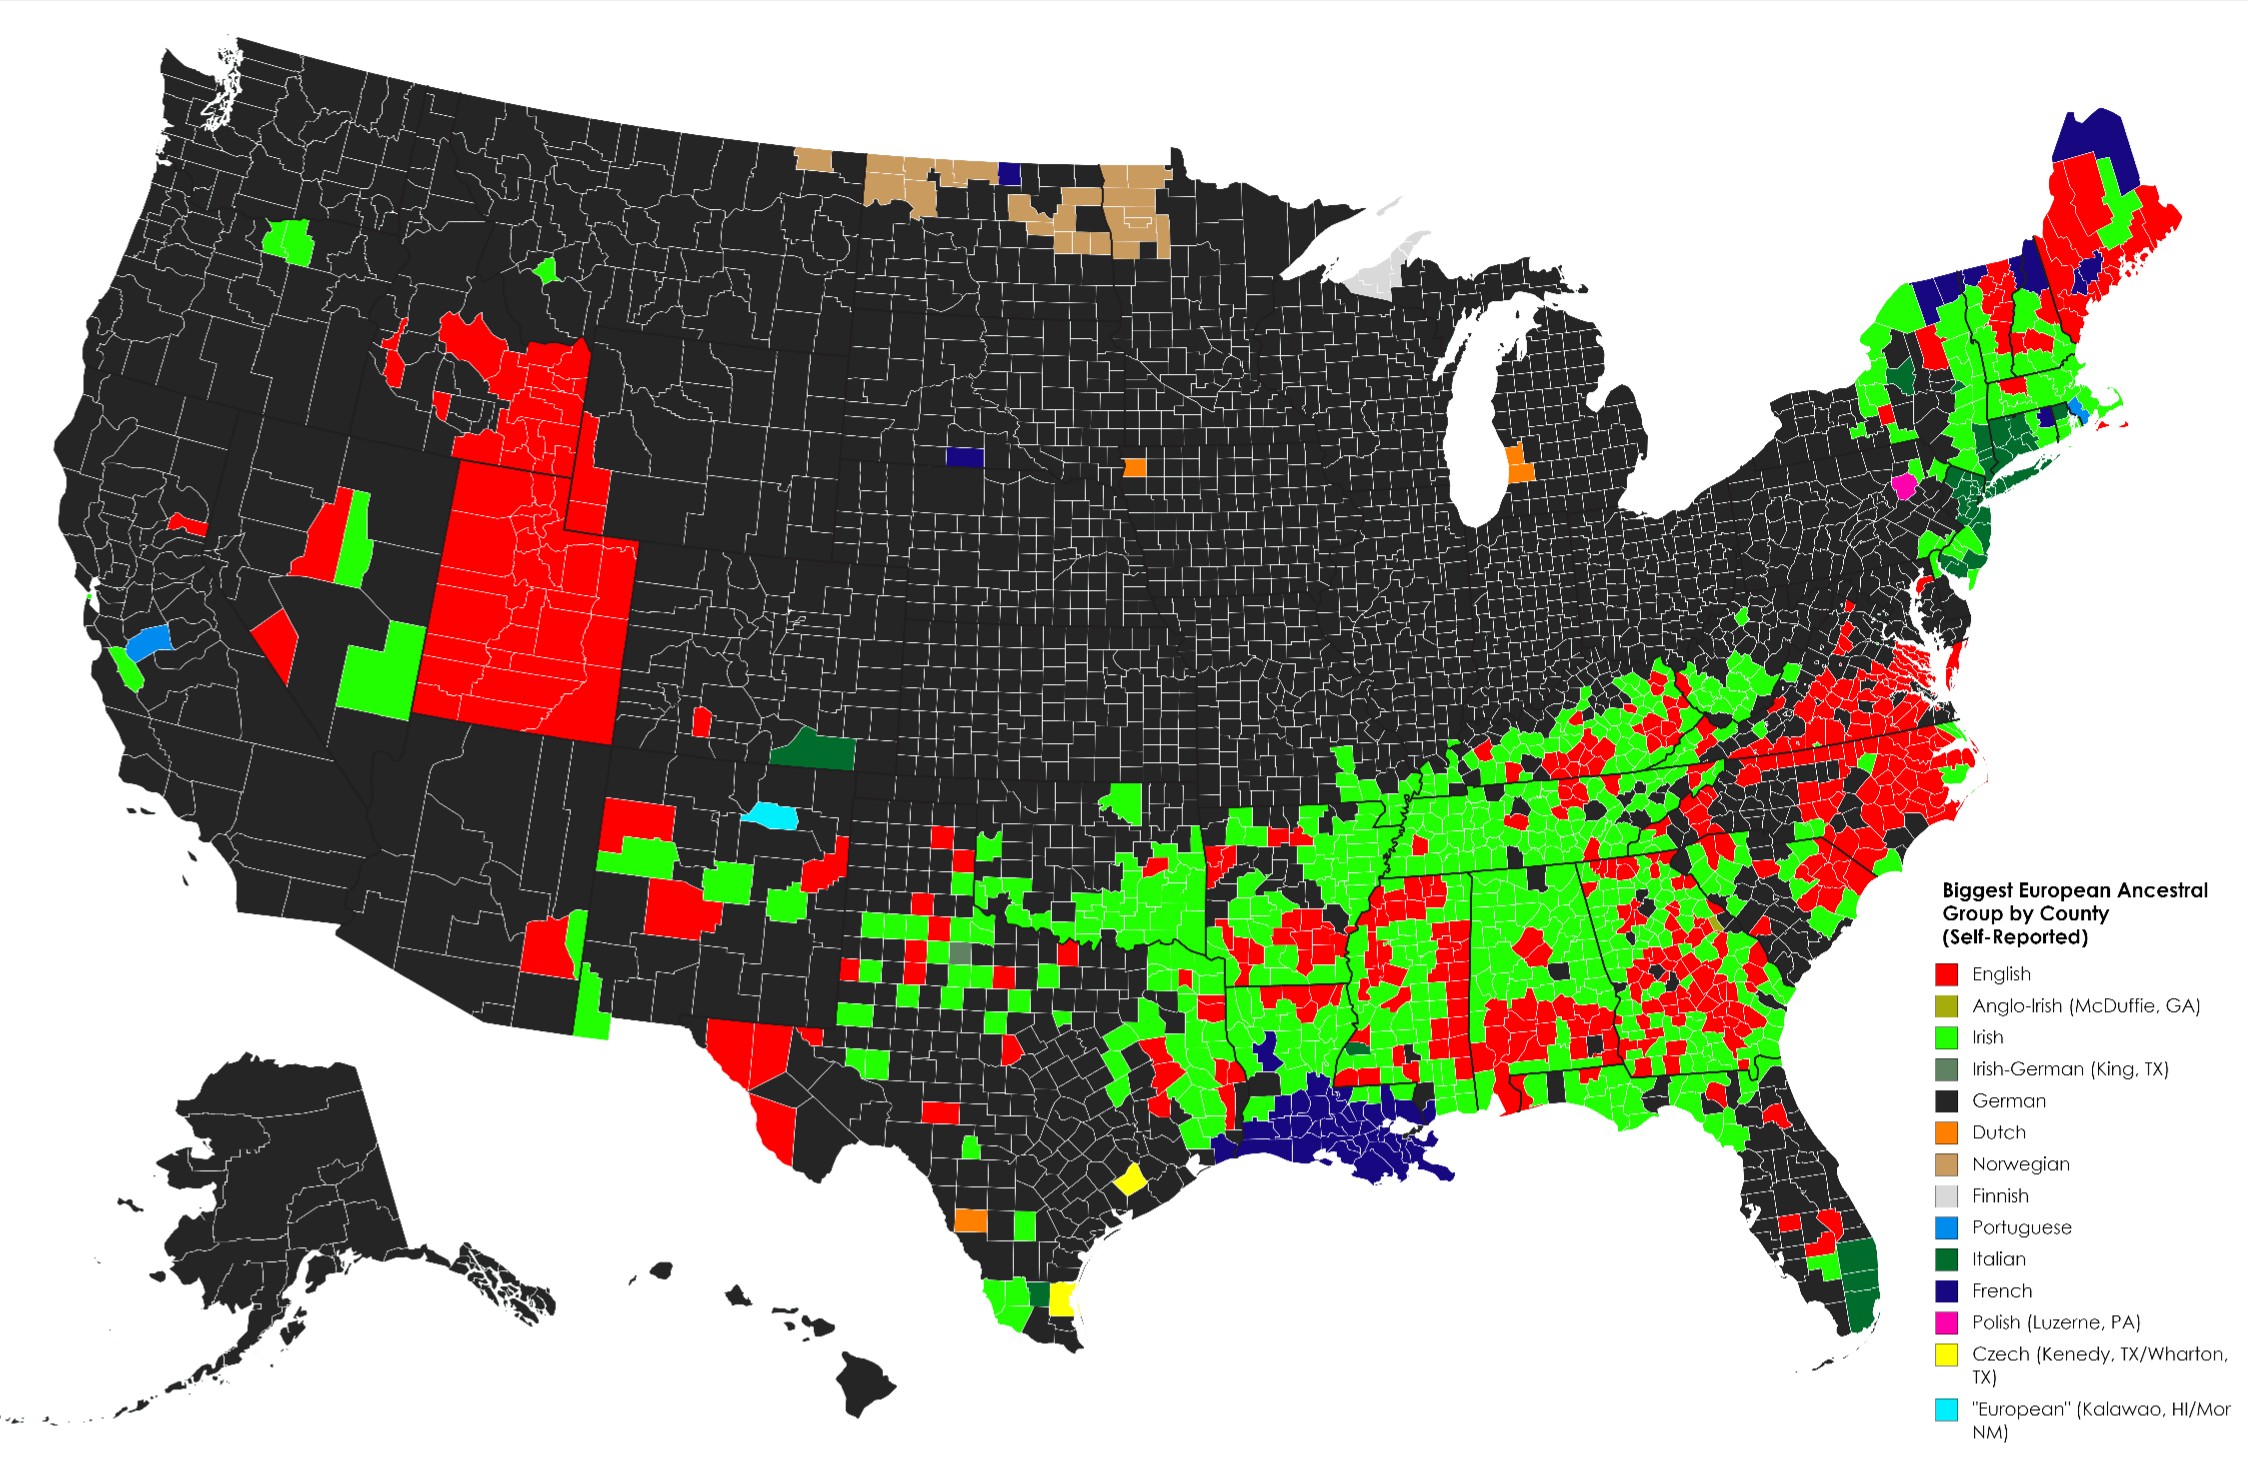 European_Ancestry_in_the_US_by_county.jpg